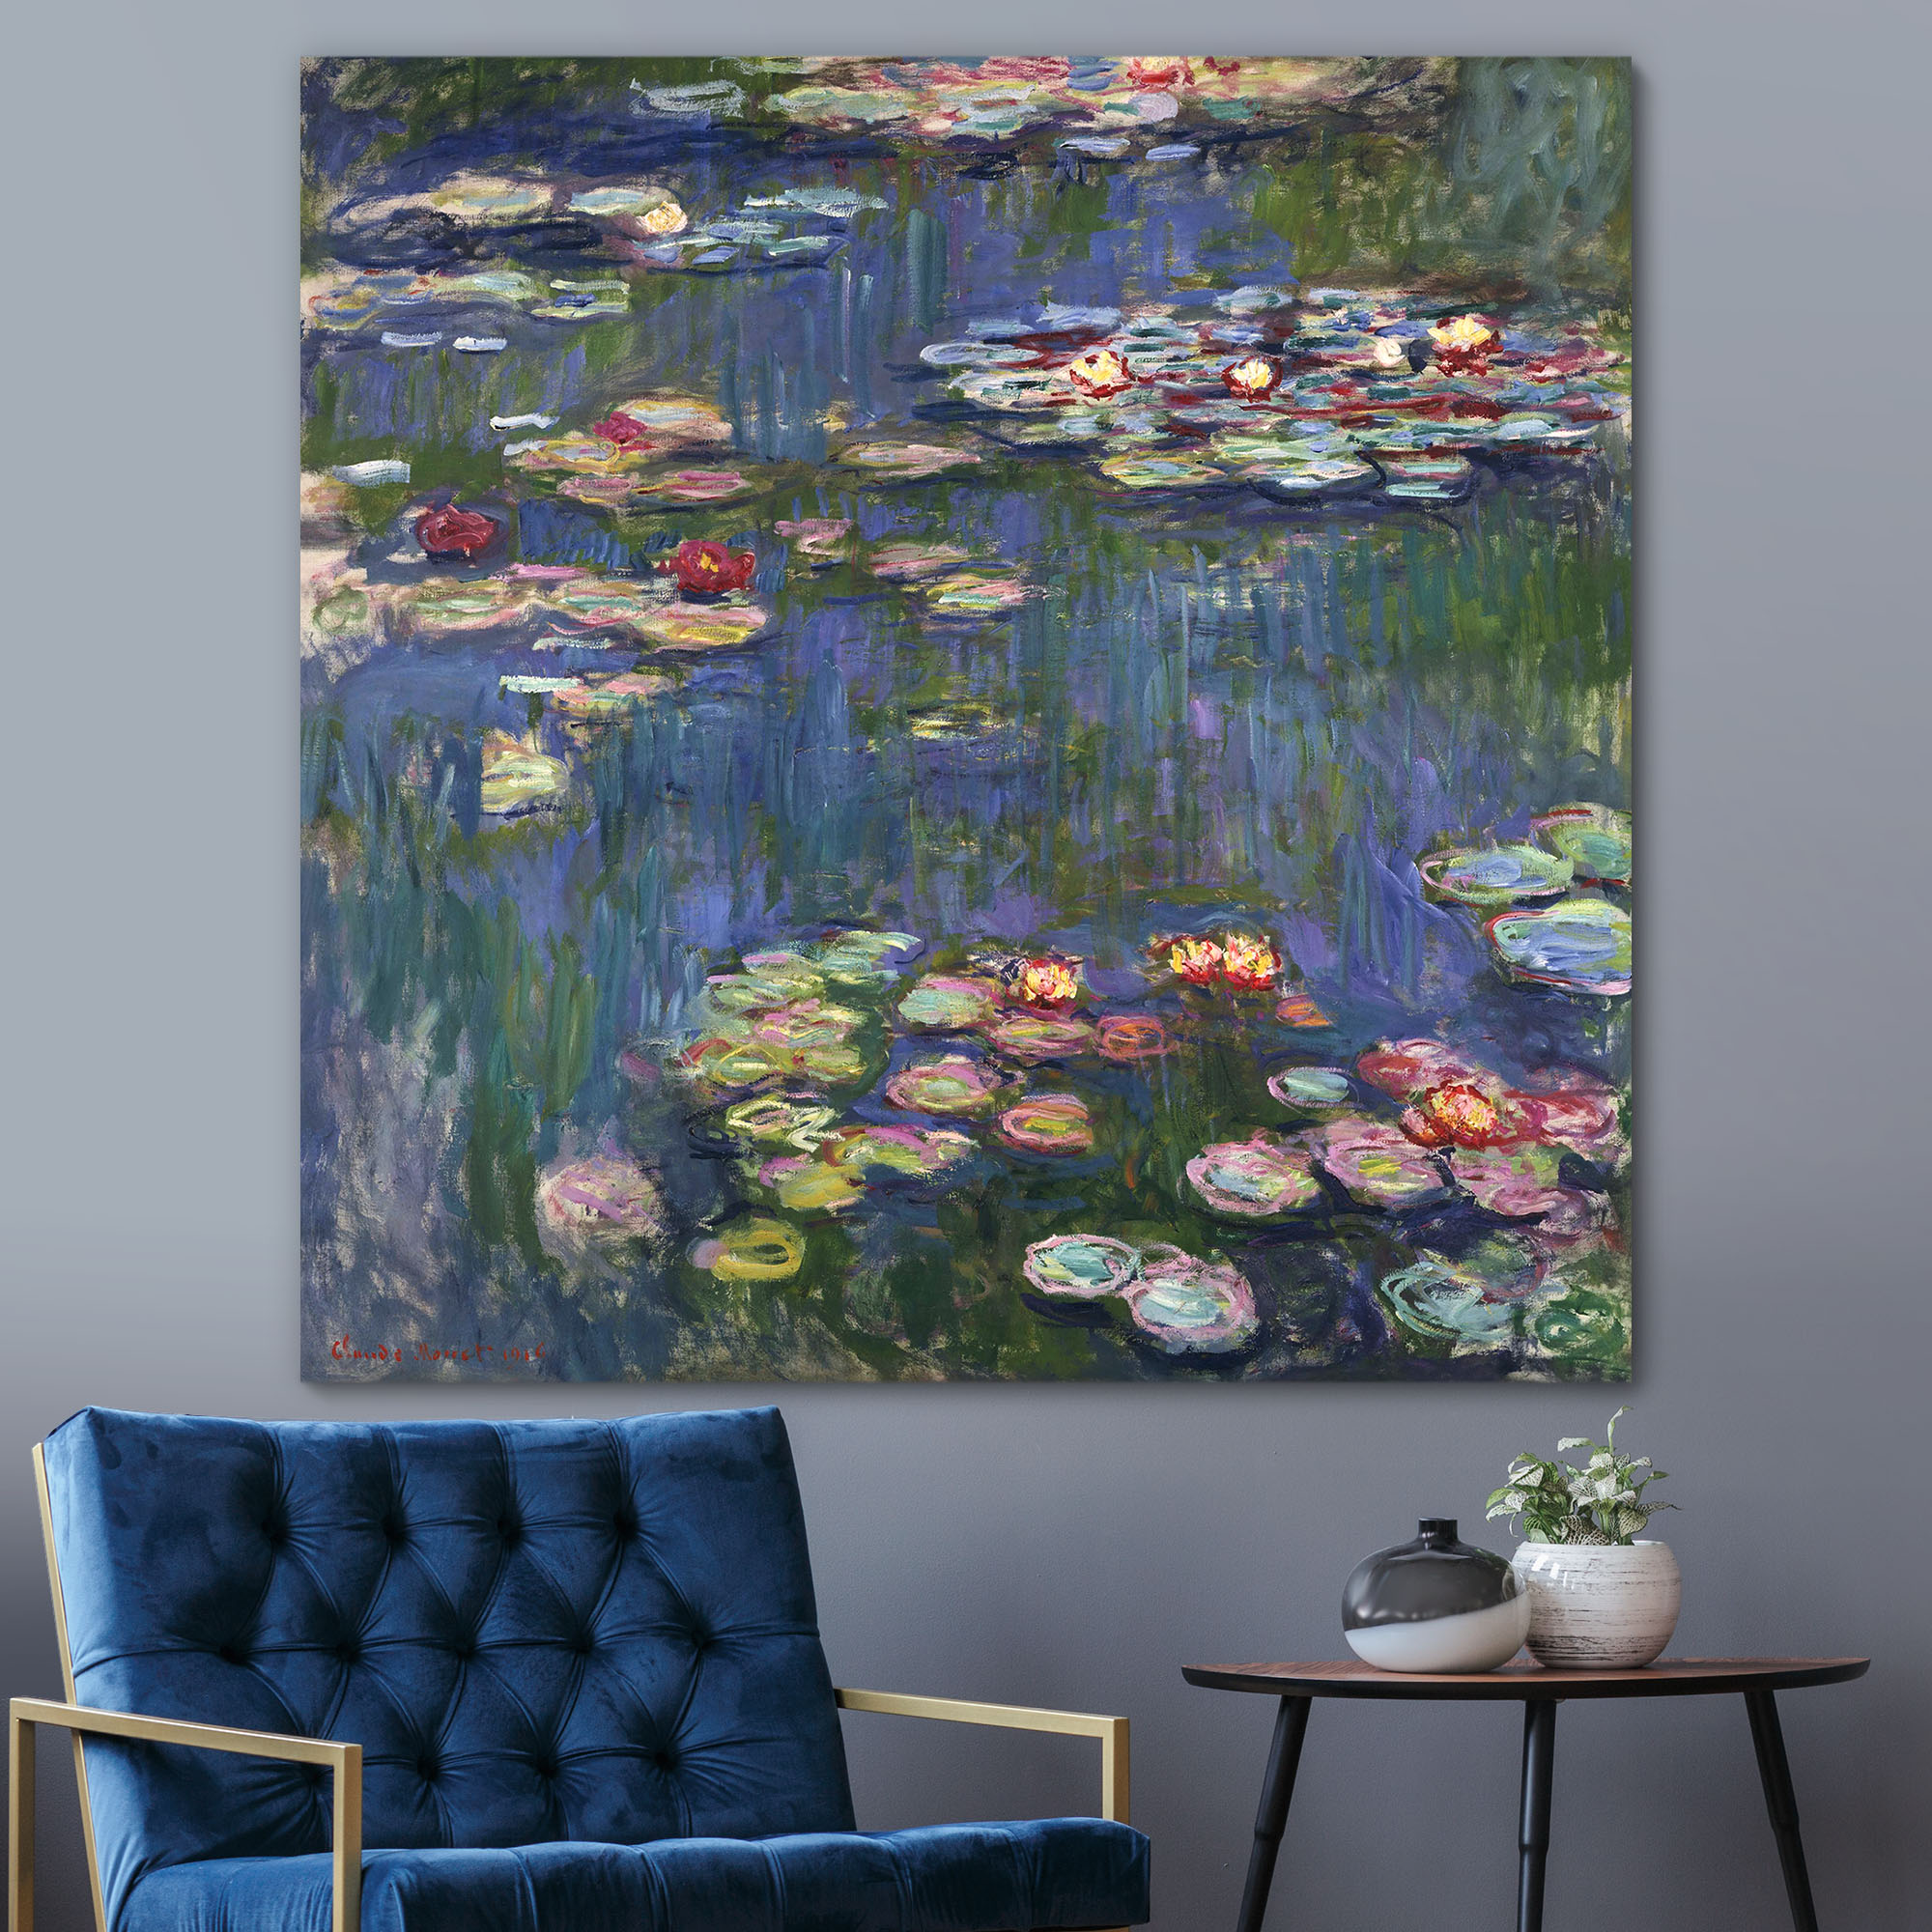 famous monet paintings the water lily pond in a living room